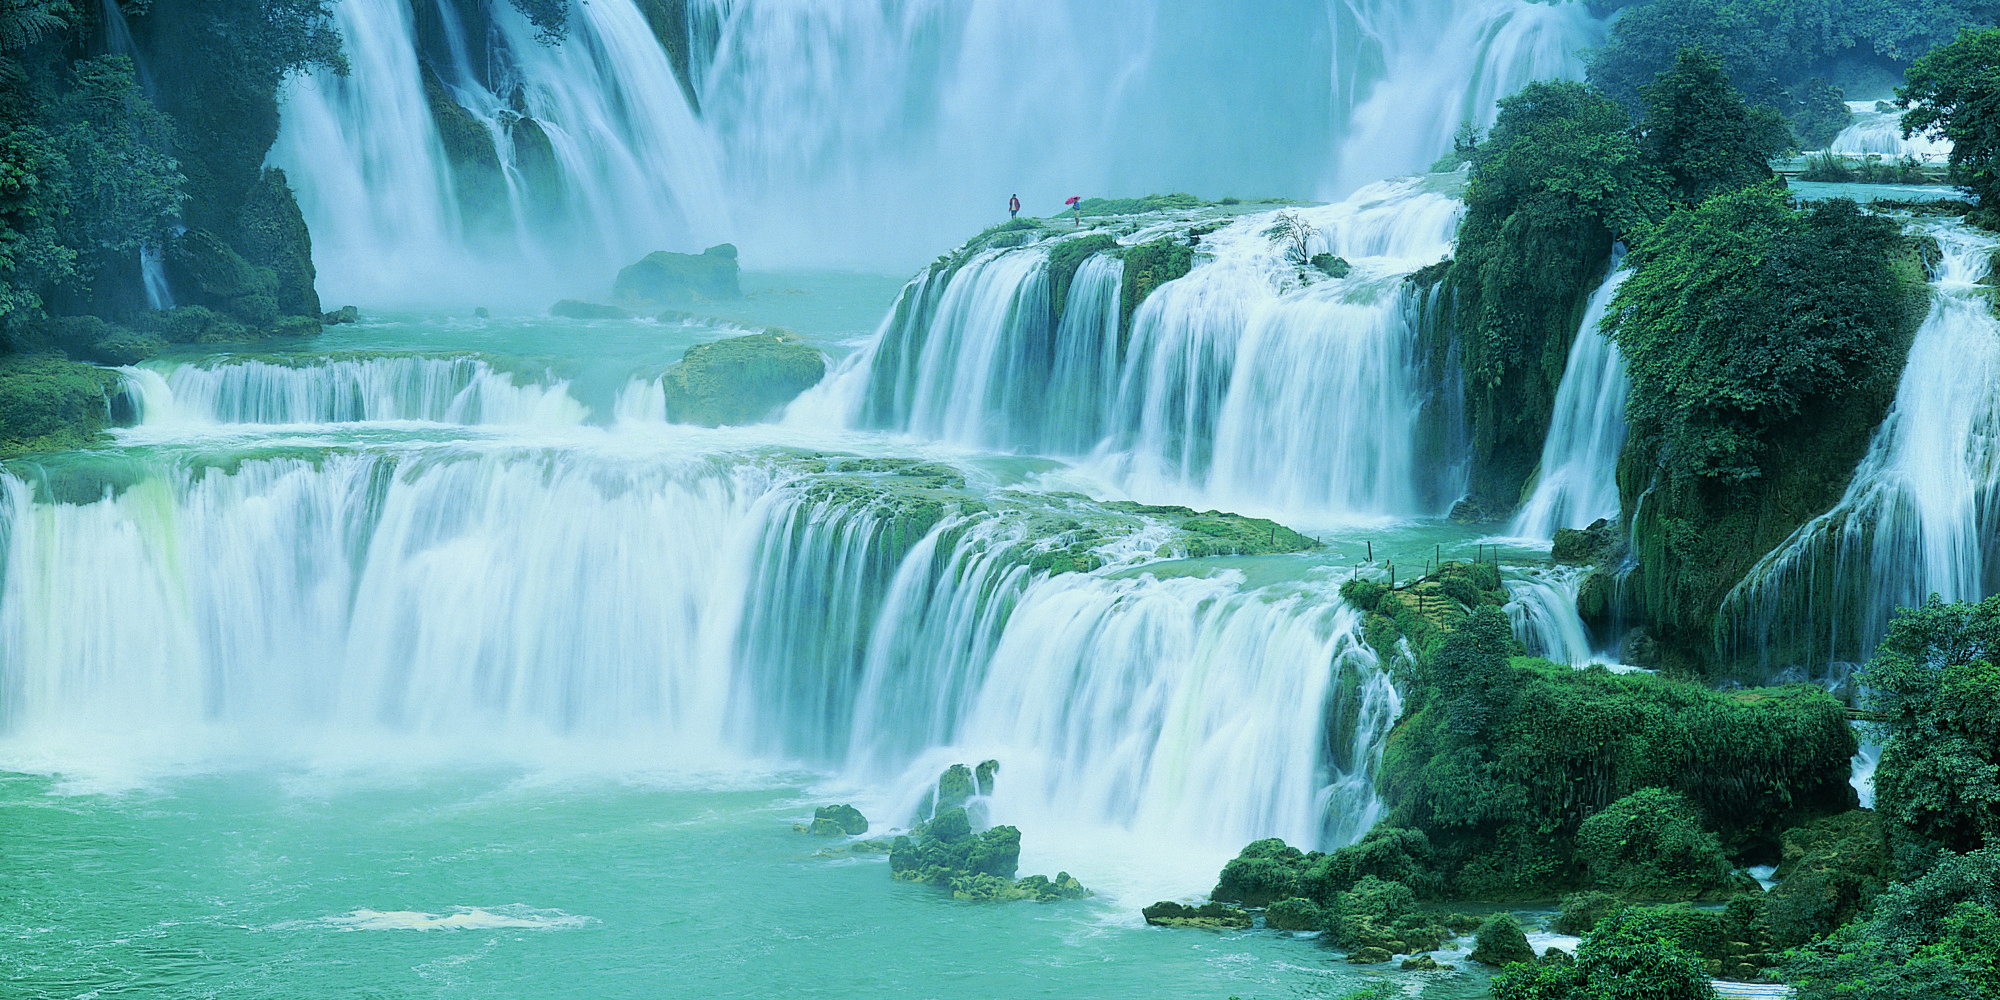 These Waterfalls From Around The World Will Provide Some Mental ...